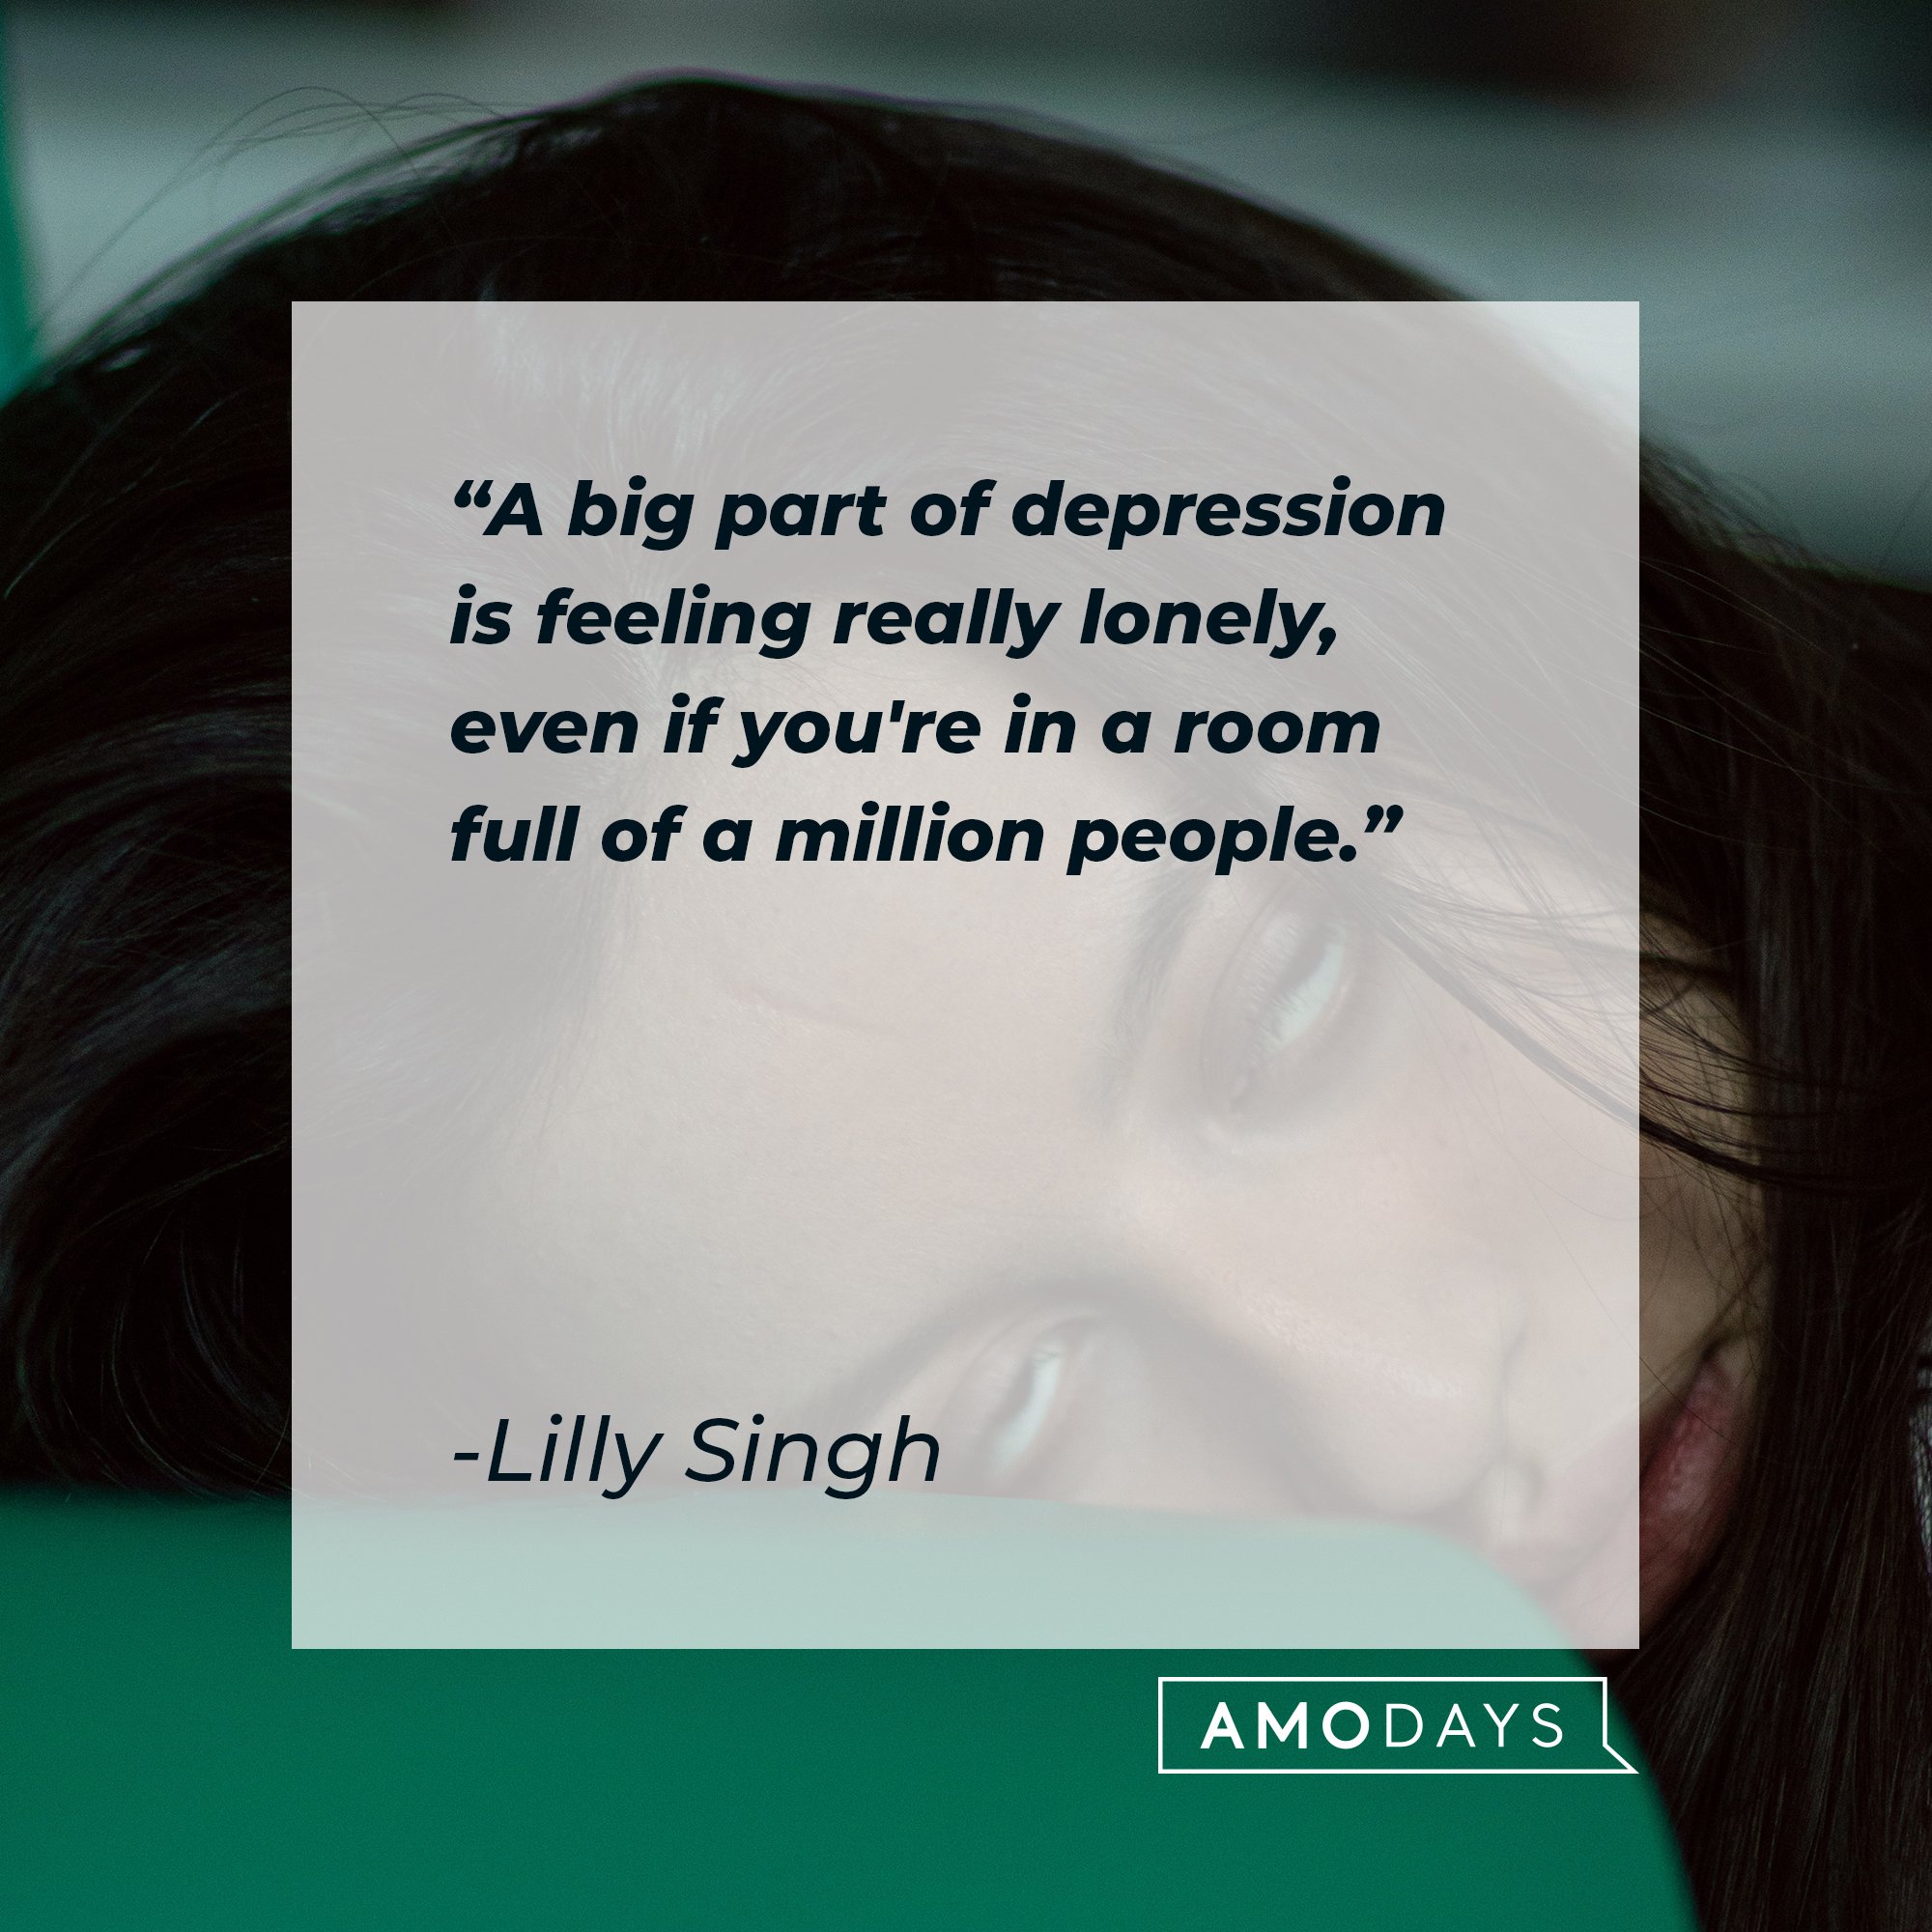 Lilly Singh's quote: "A big part of depression is feeling really lonely, even if you're in a room full of a million people." | Image: AmoDays